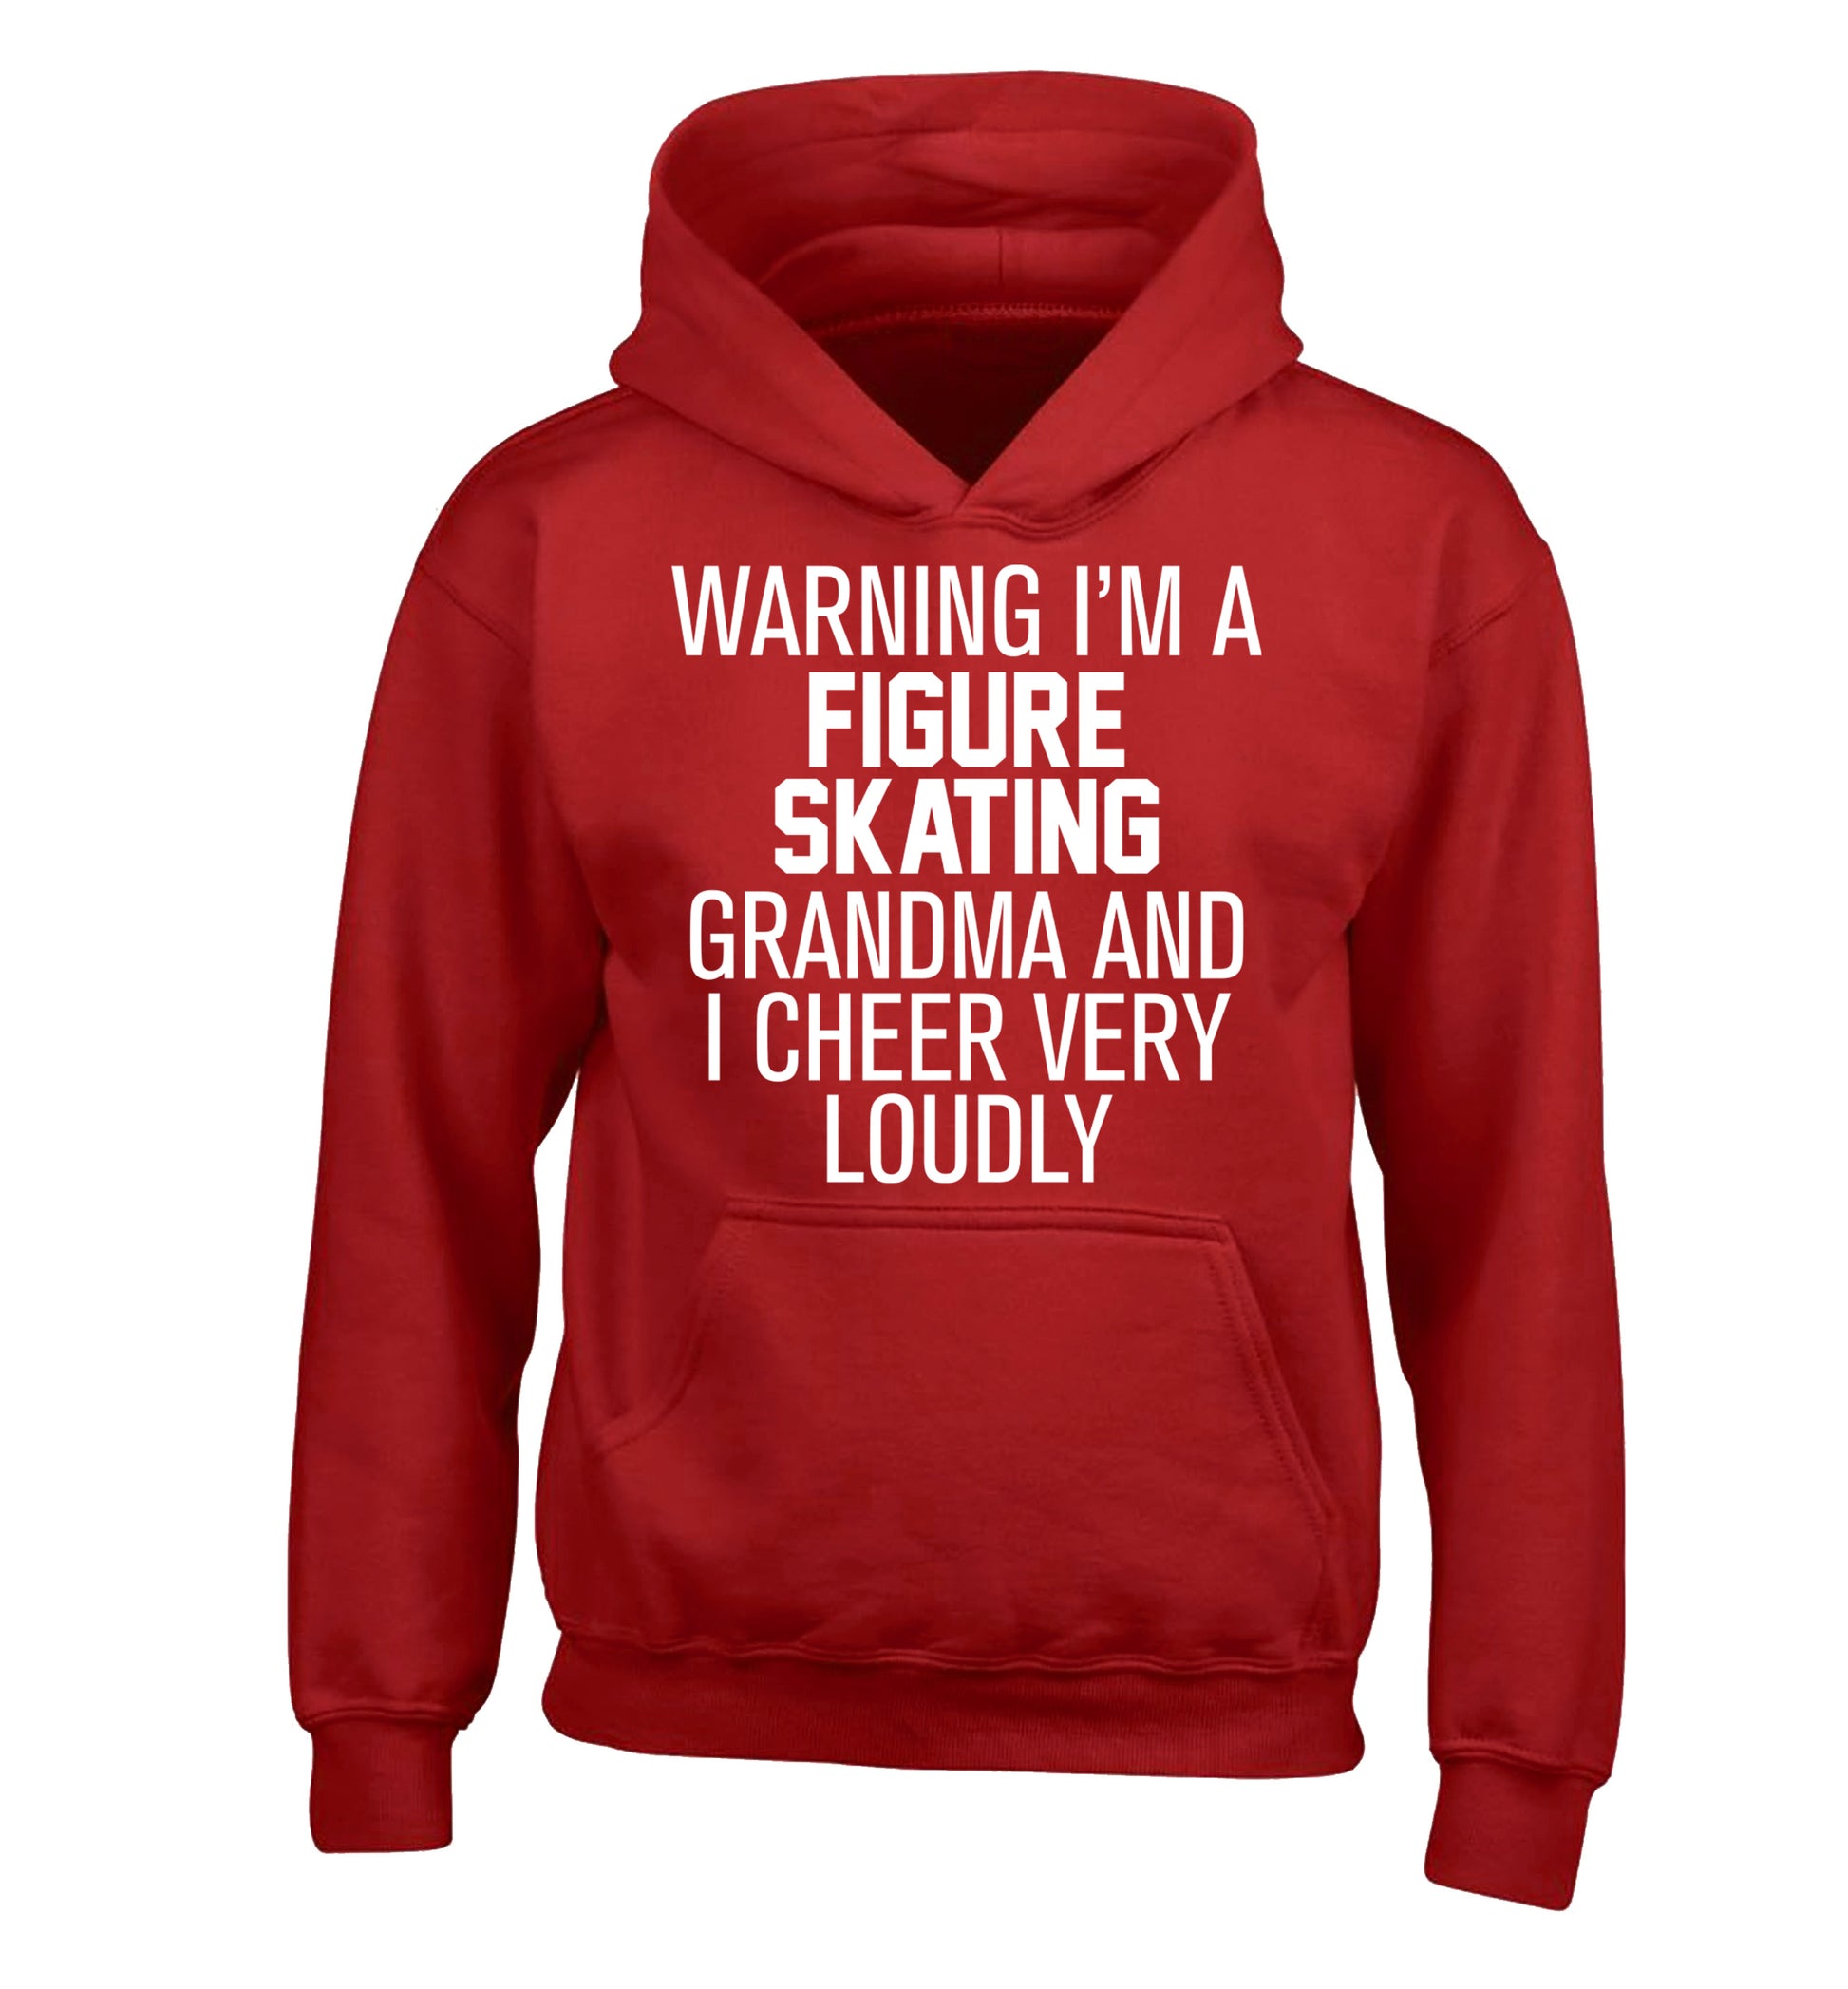 Warning I'm a figure skating grandma and I cheer very loudly children's red hoodie 12-14 Years